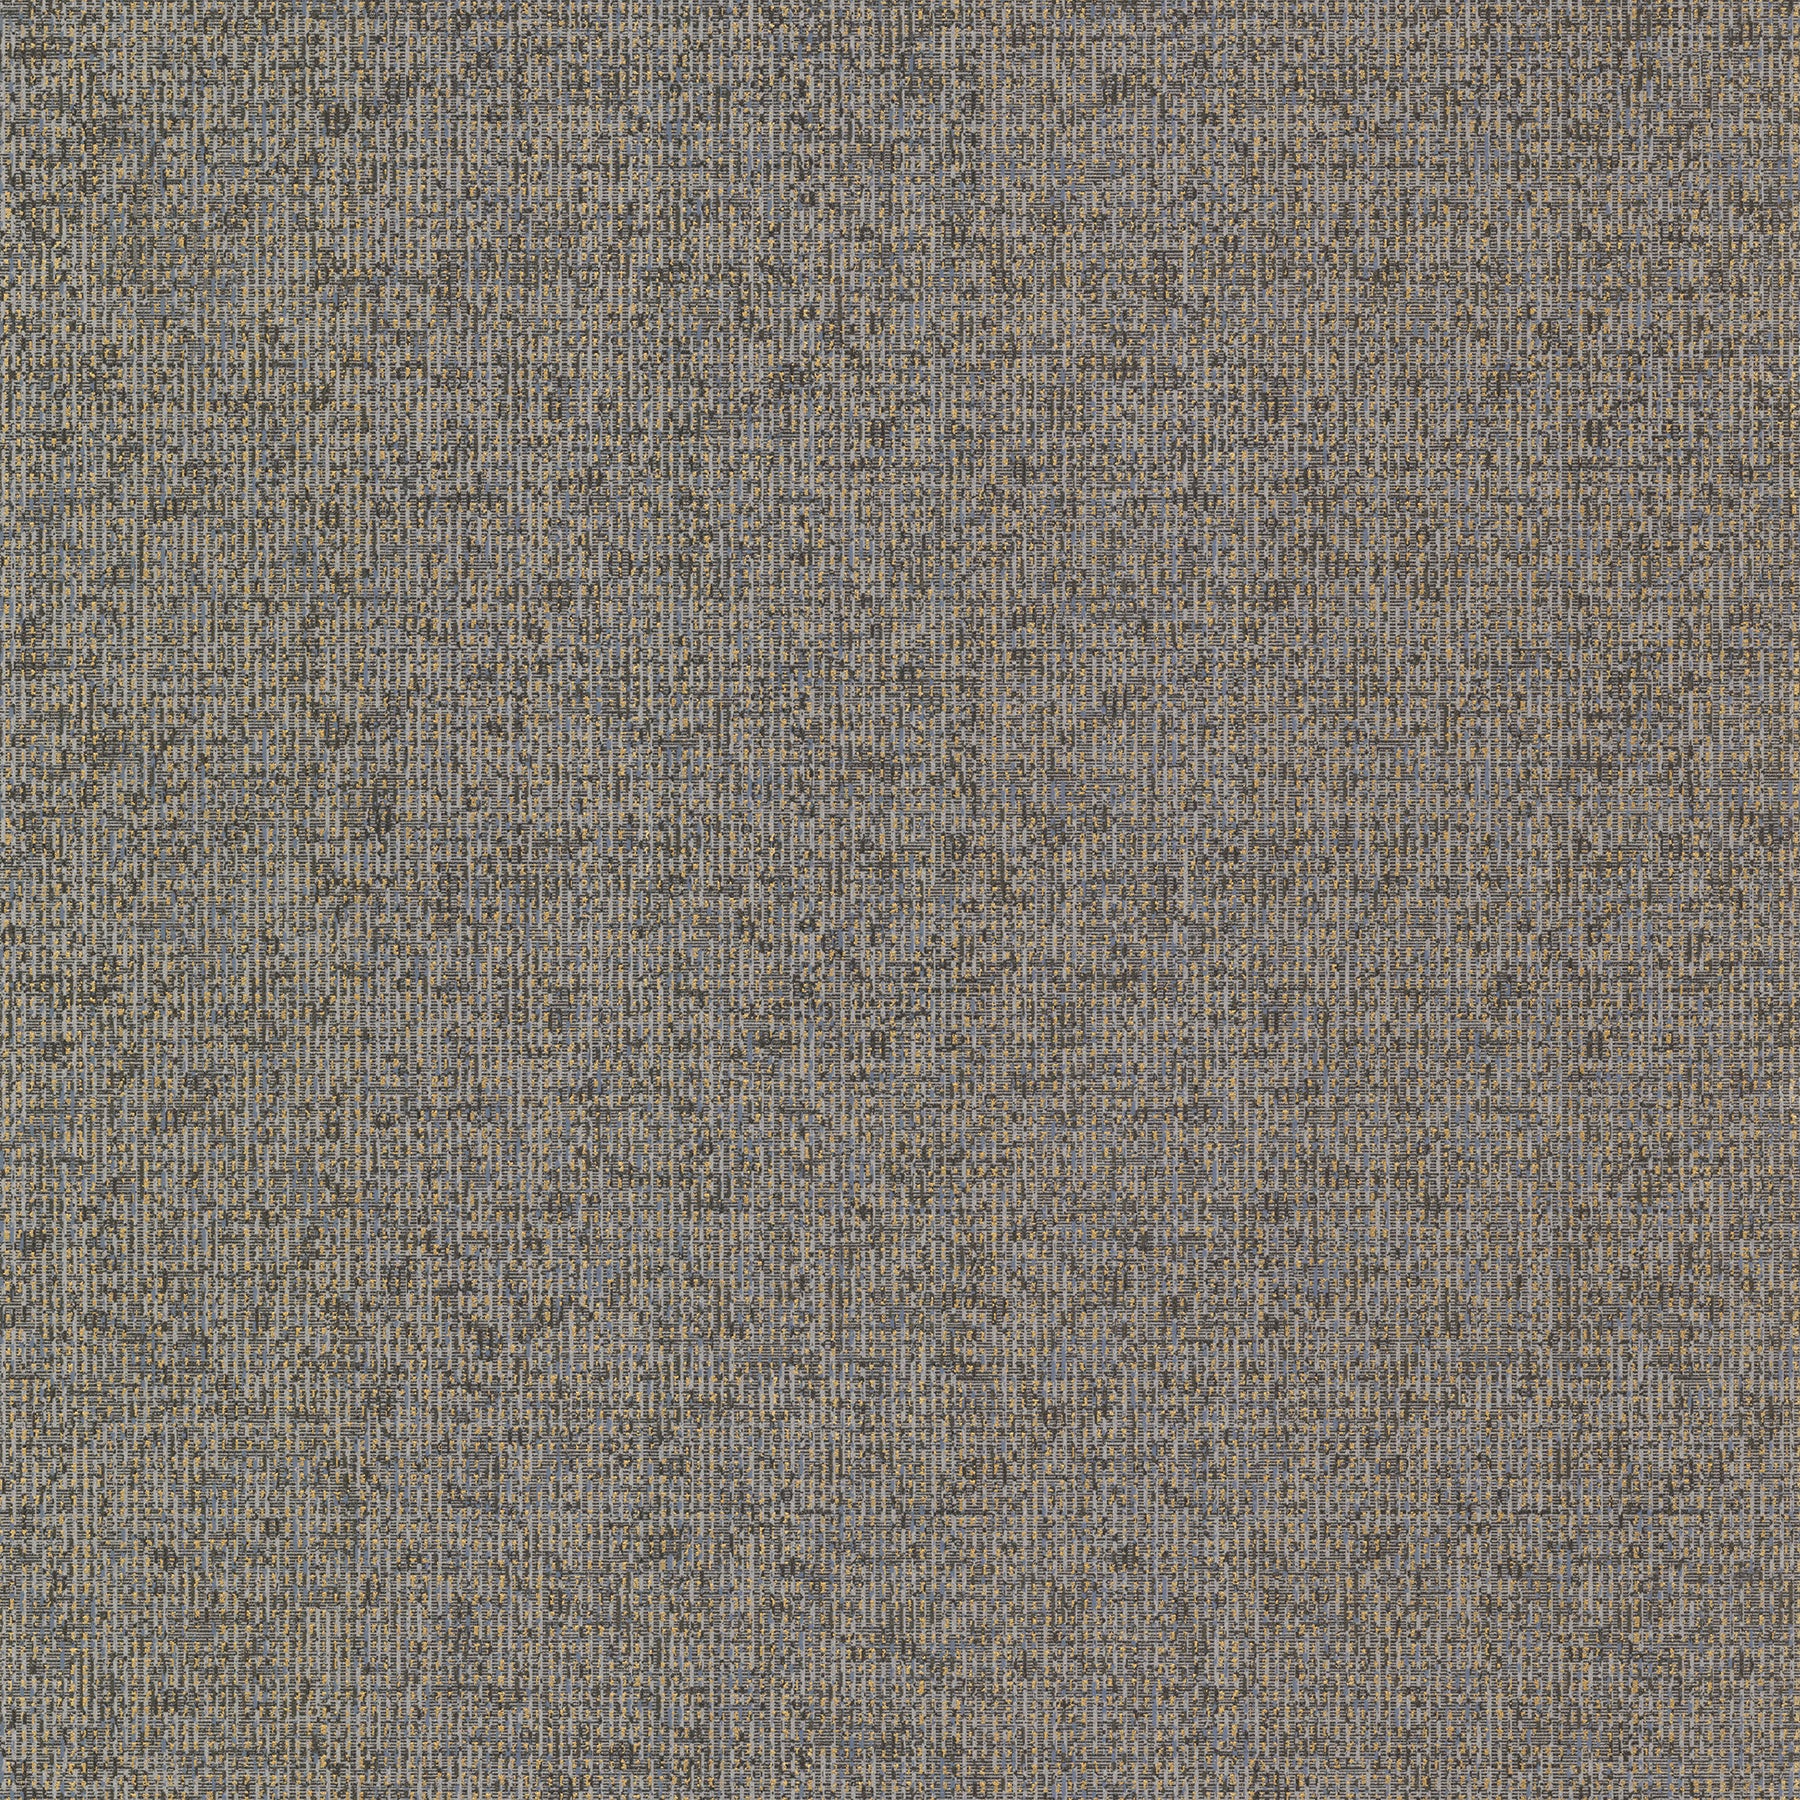 Looking for 4019-86481 Lustre Maia Stone Faux Linen Stone A-Street Prints Wallpaper